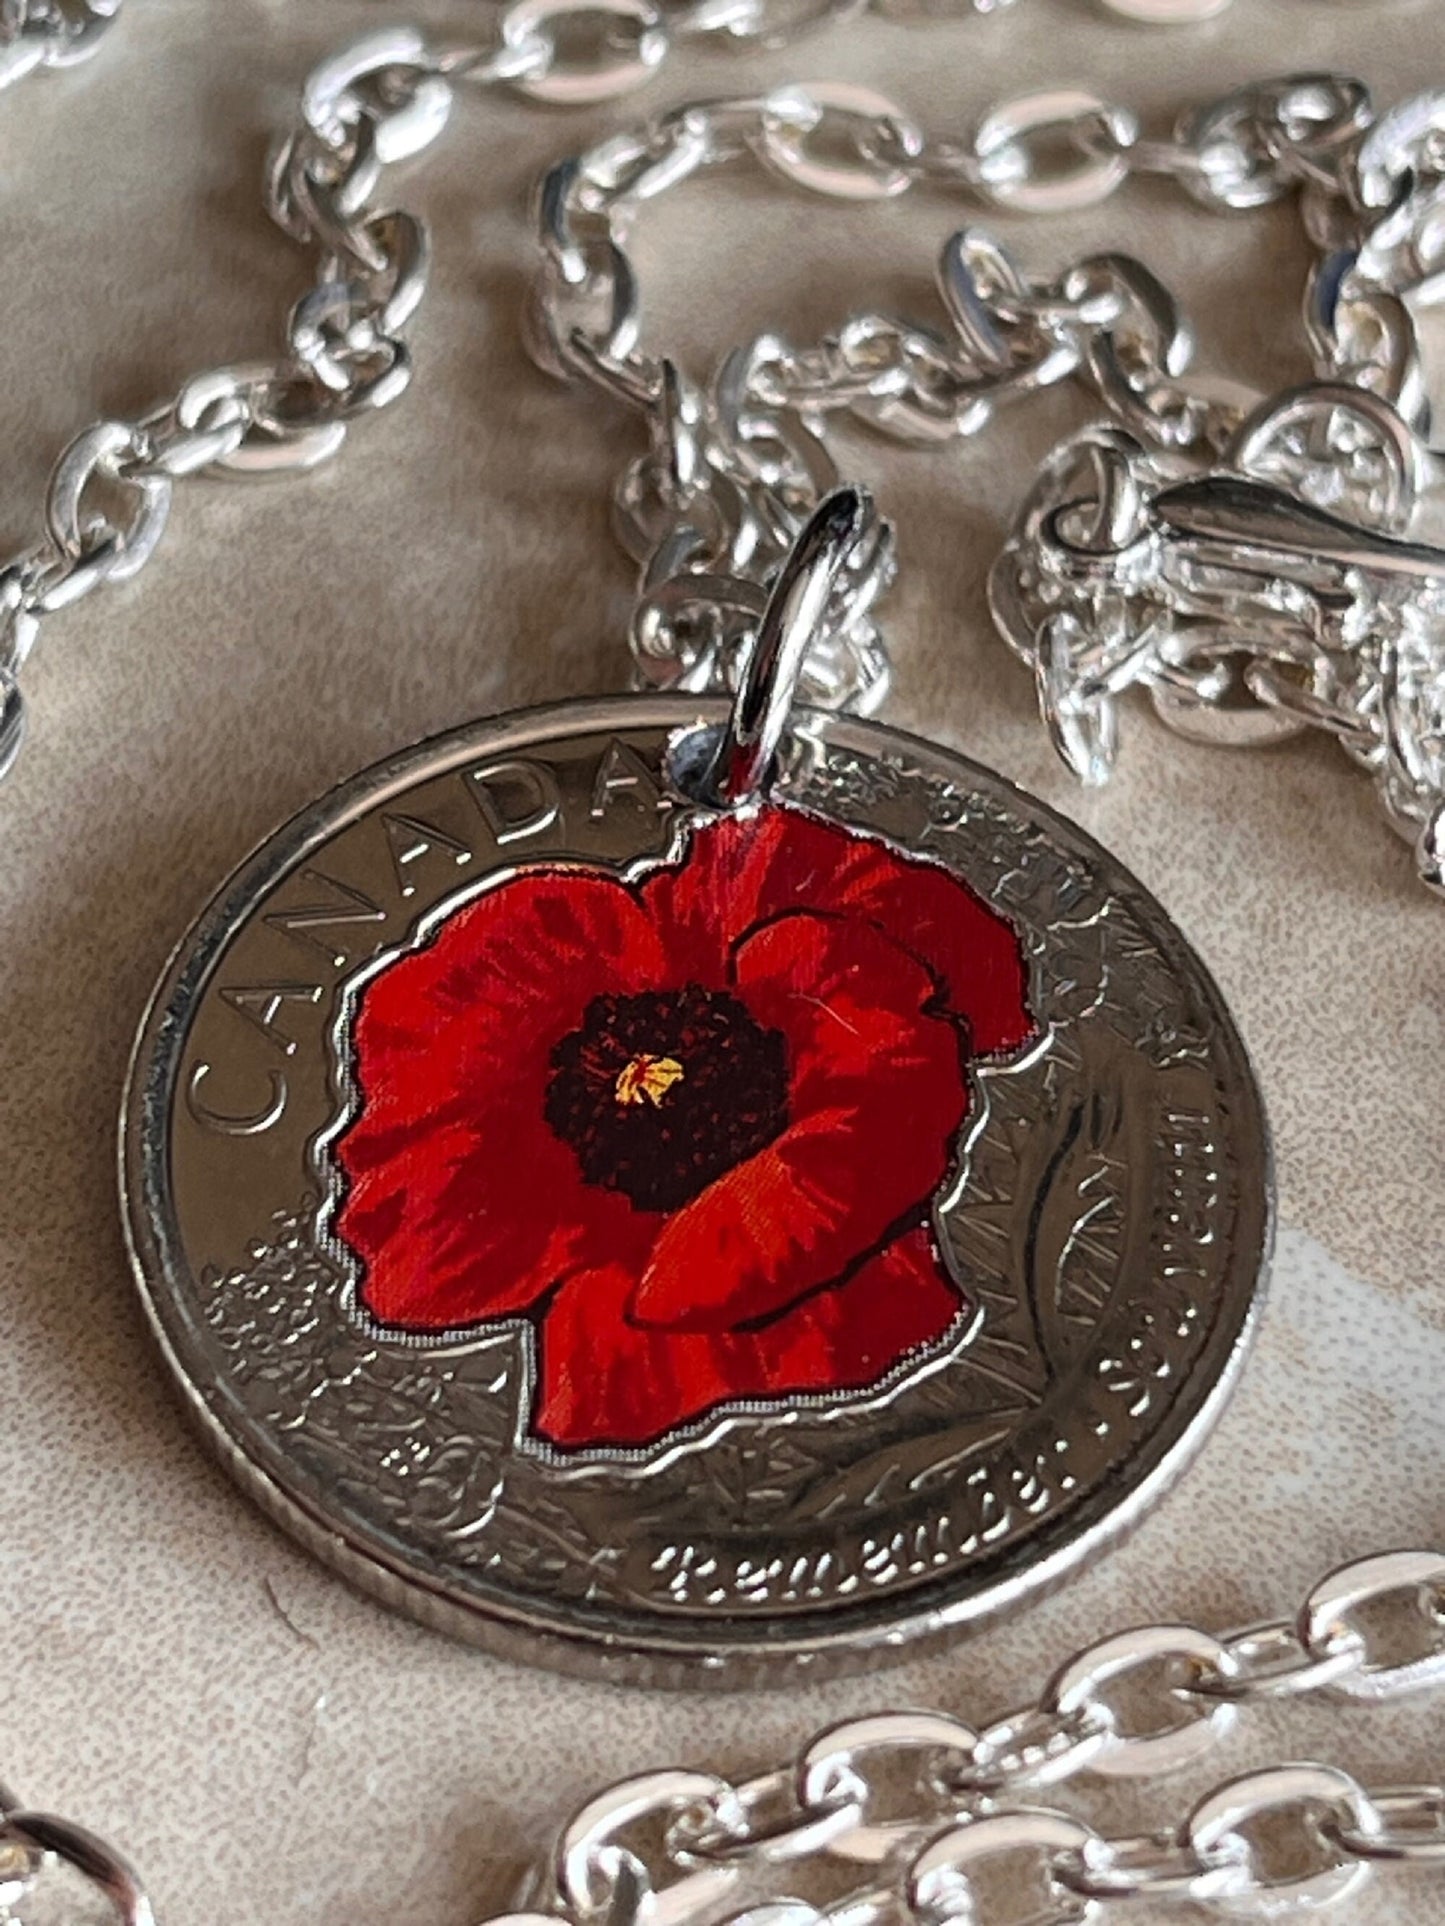 Canadian Quarter Coin Necklace 2015 Red Poppy Coloured Uncirculated 25 Cents Custom Made Vintage Rare Coins Coin Enthusiast Canada